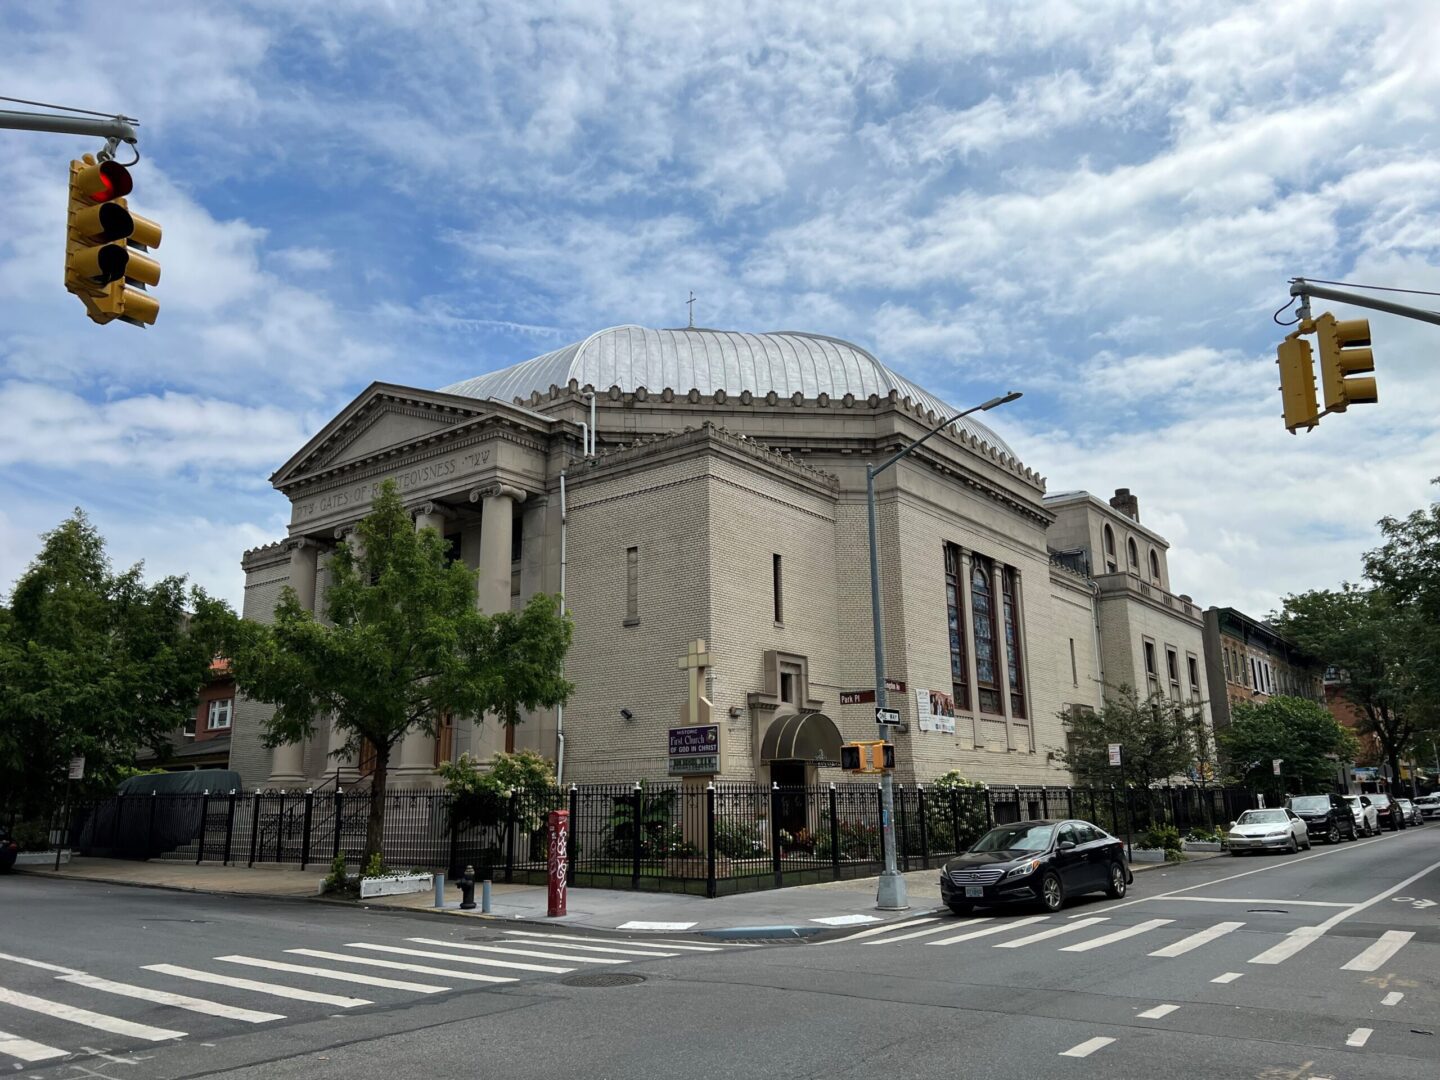 A large building with a dome roof on the corner of a street.